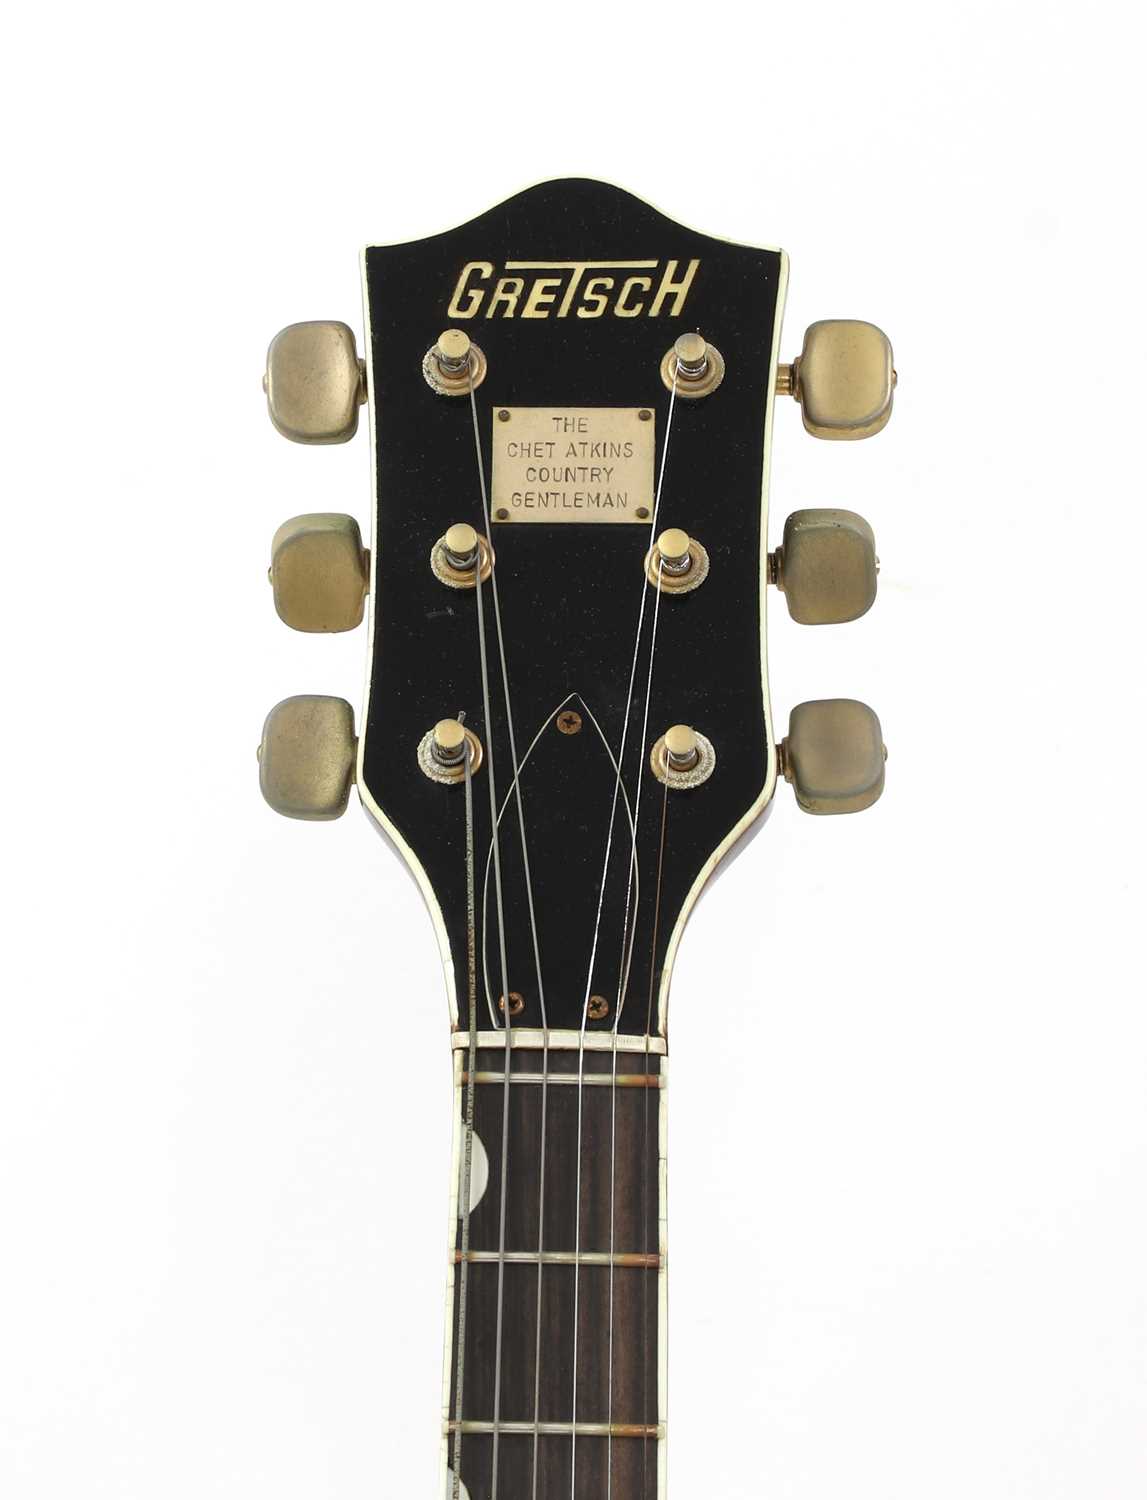 A 1966 Gretsch Chet Atkins Country Gentleman electric guitar, - Image 4 of 4